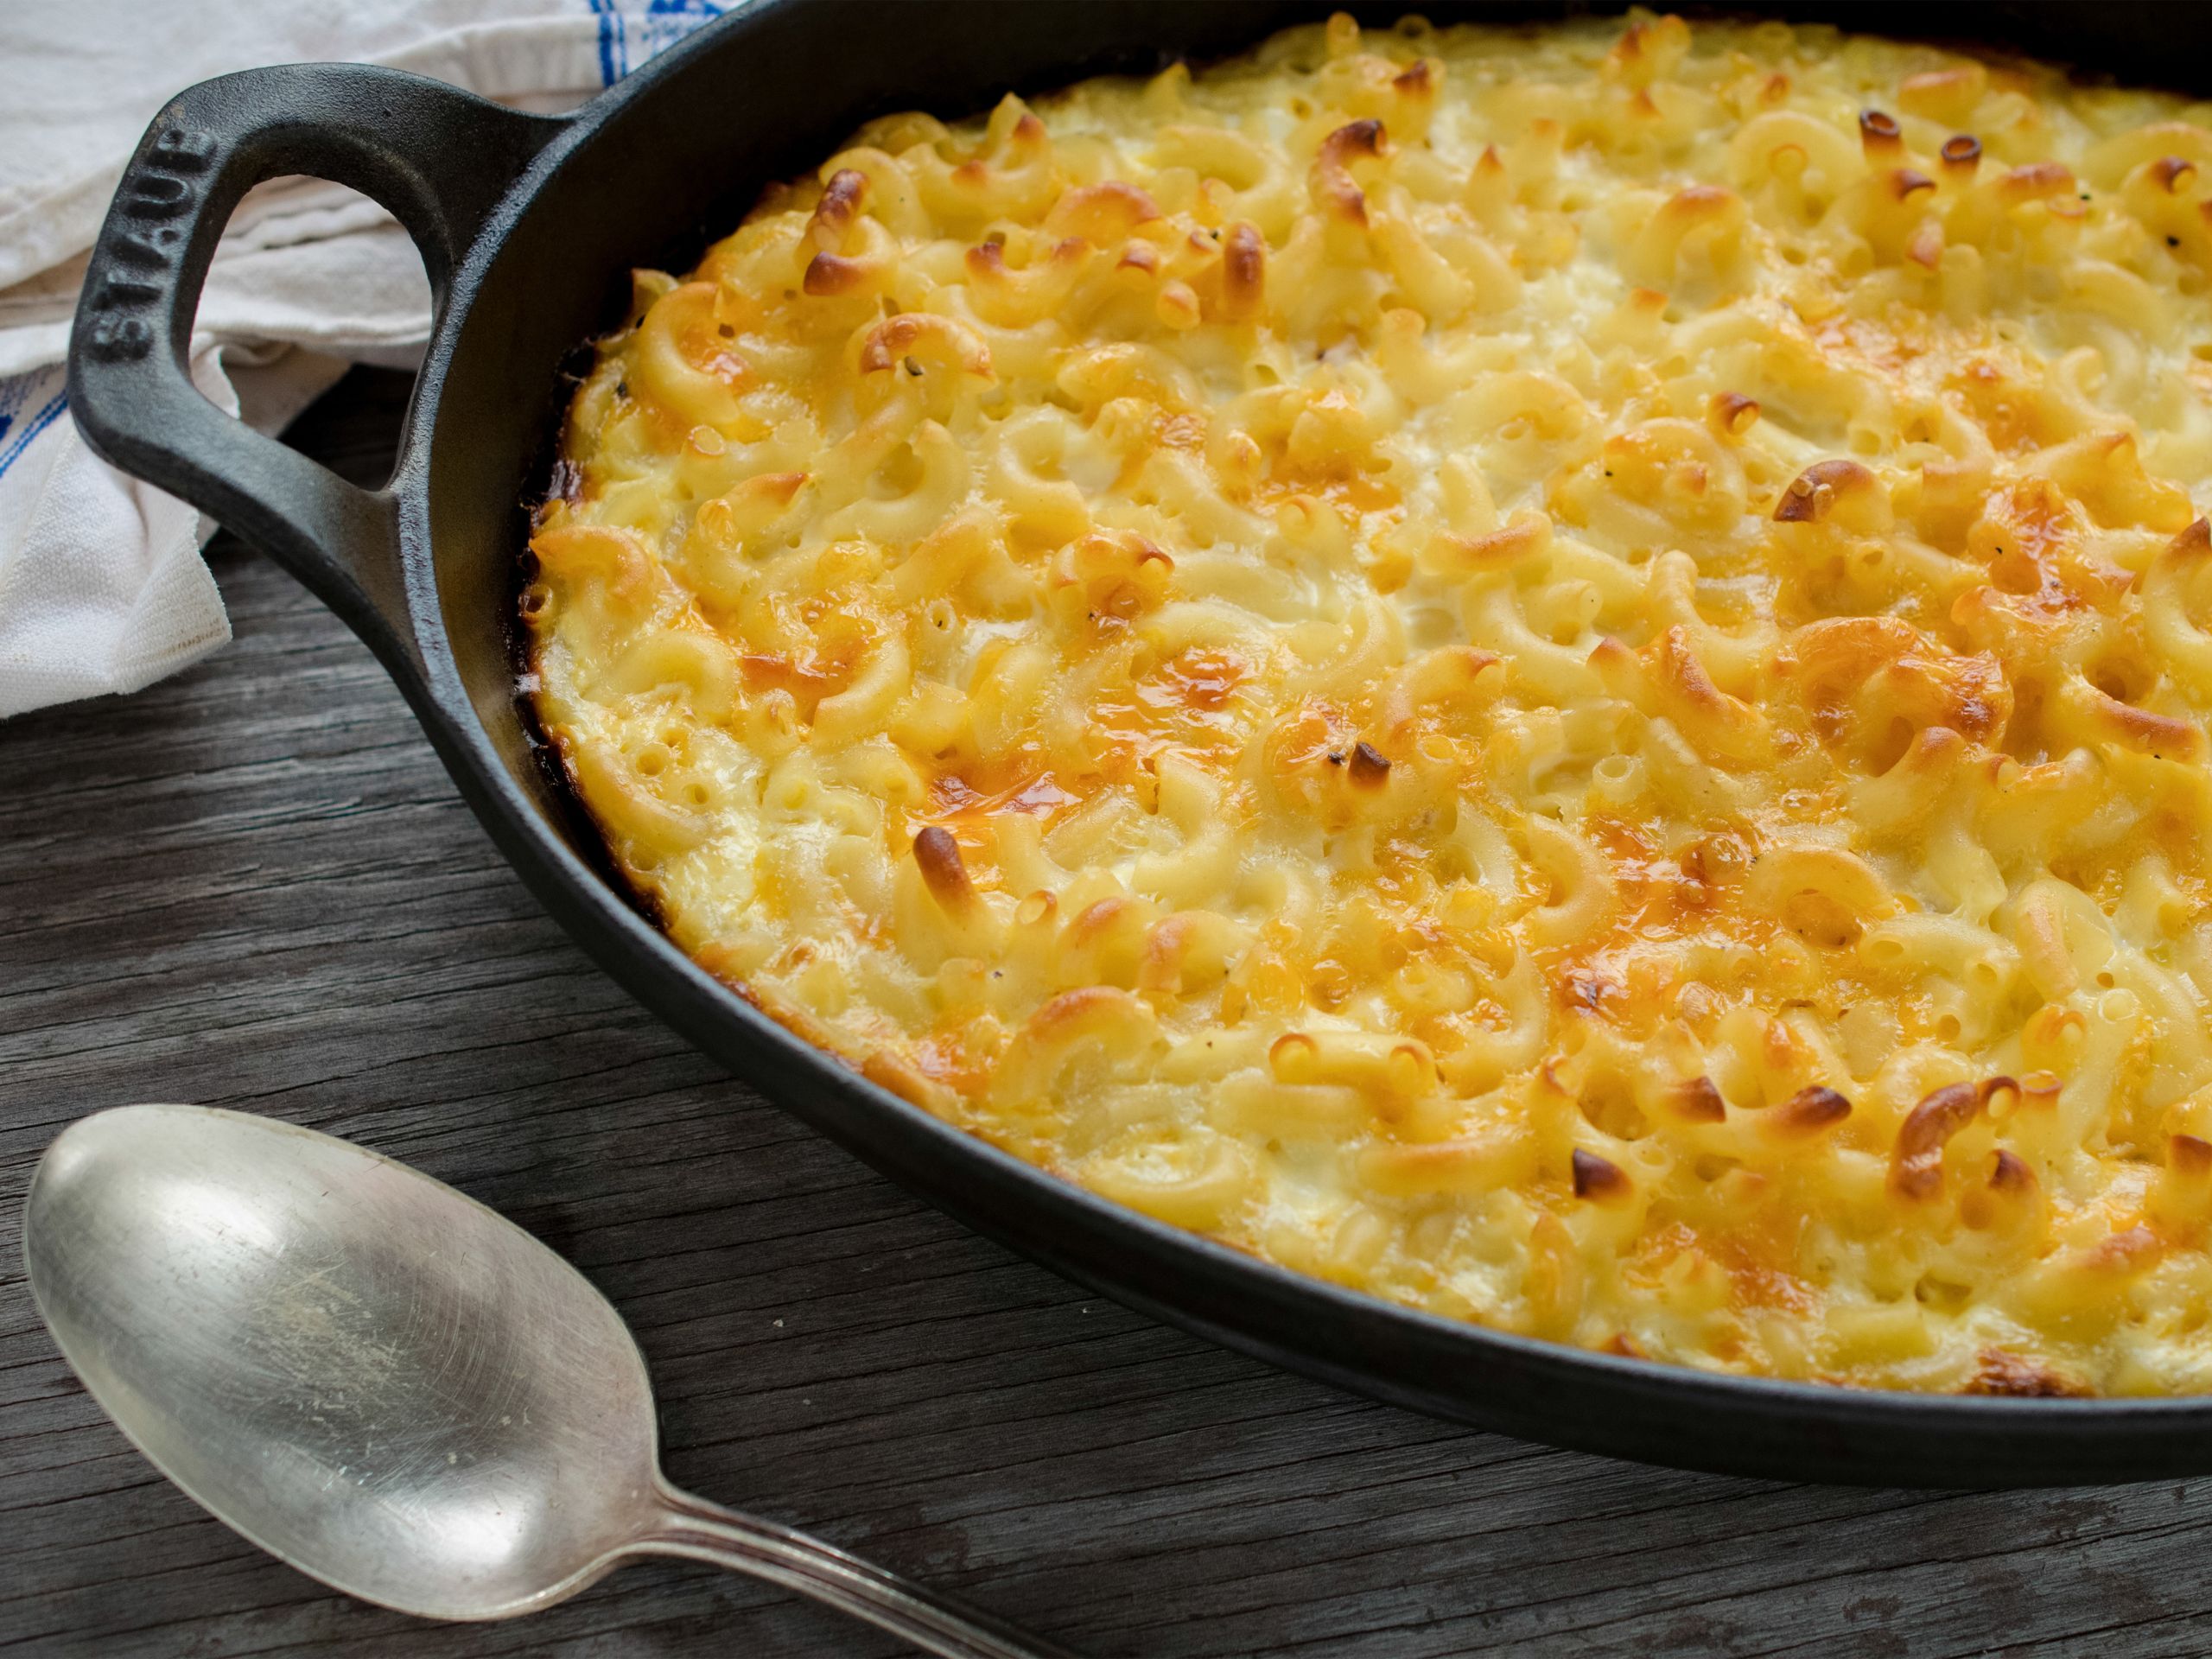 Southern Baked Macaroni and Cheese Recipe Beautiful southern Baked Macaroni and Cheese